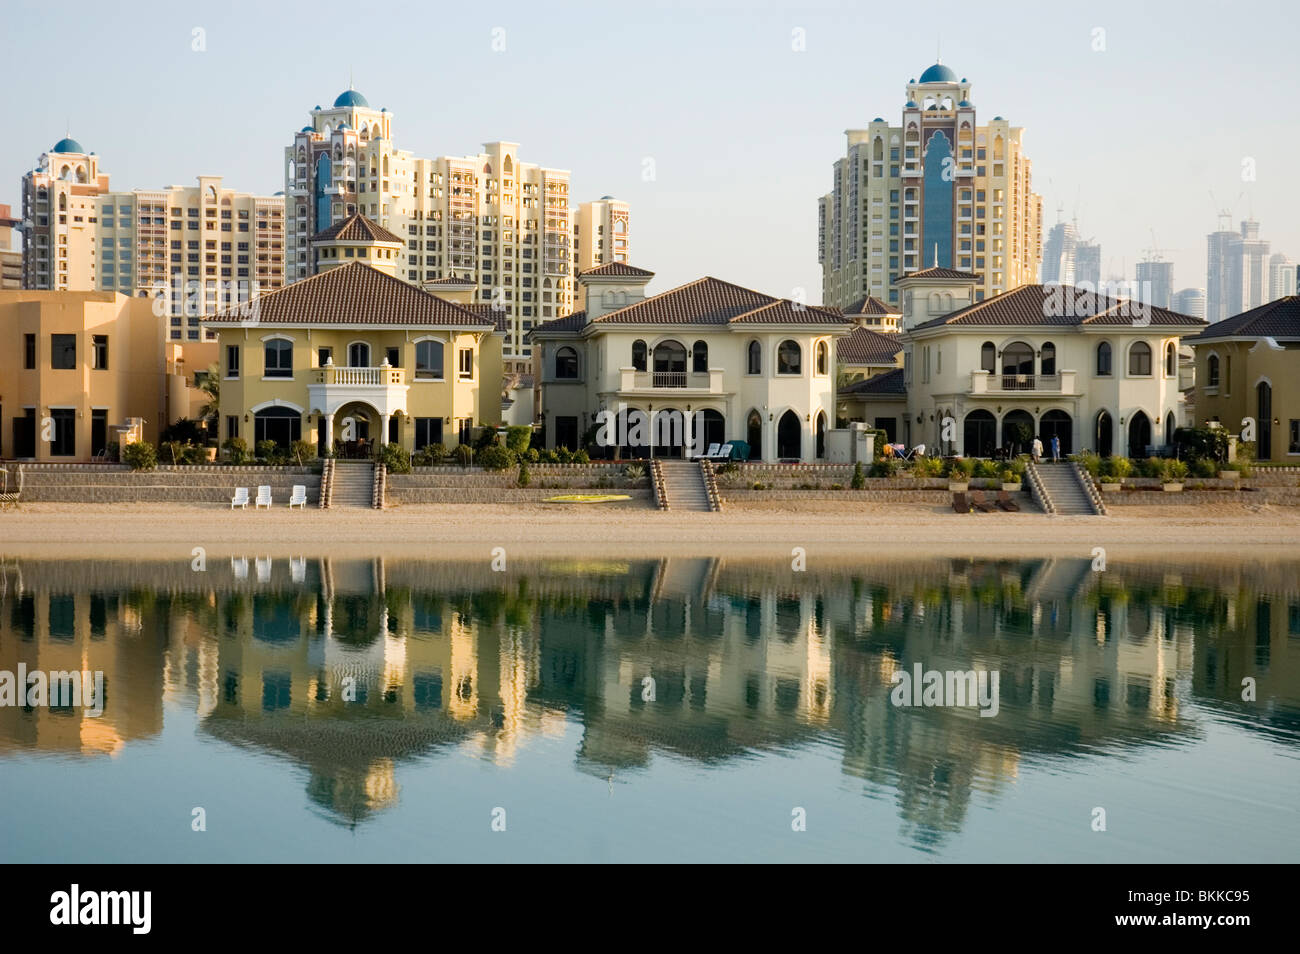 A view of houses on a frond of the Palm Jumeirah in Dubai with apartment blocks and the city of Dubai in the background Stock Photo